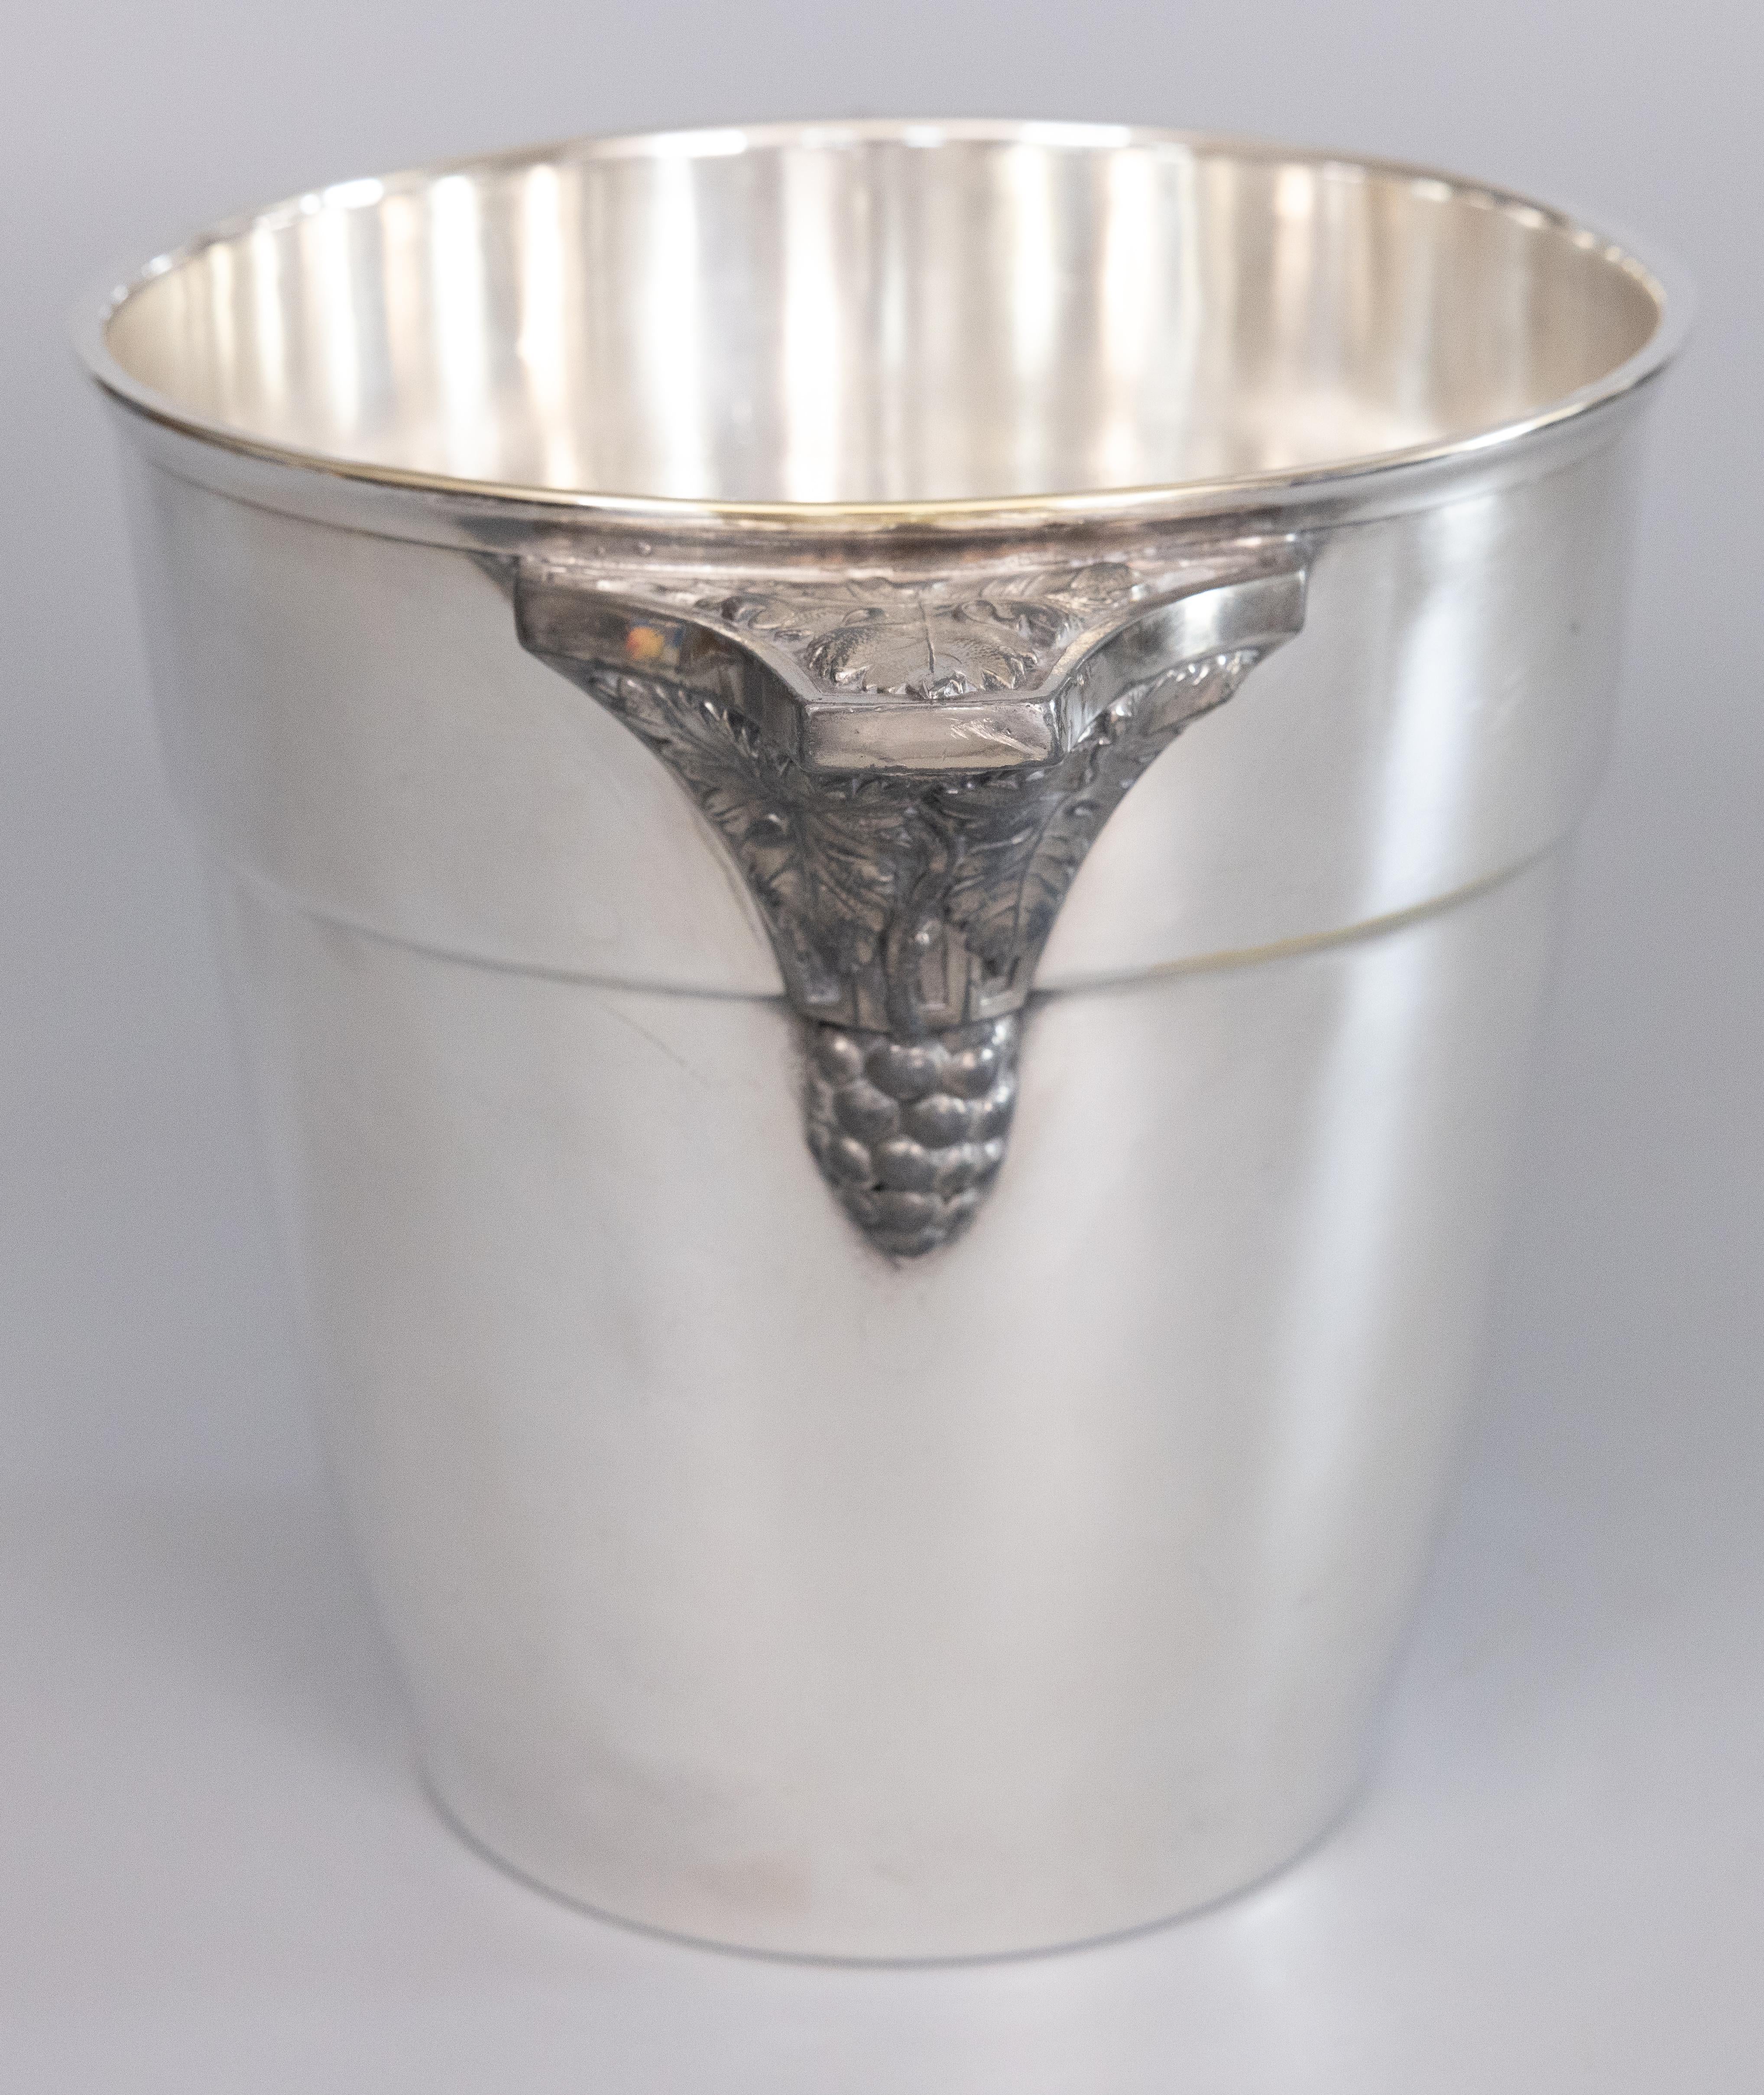 A fabulous early 20th-Century silverplated champagne bucket or wine cooler, made in Paris, France, circa 1930. Signed on reverse. This fine quality ice bucket is solid and heavy with grapes and leaves pewter handles and a sleek design, perfect for